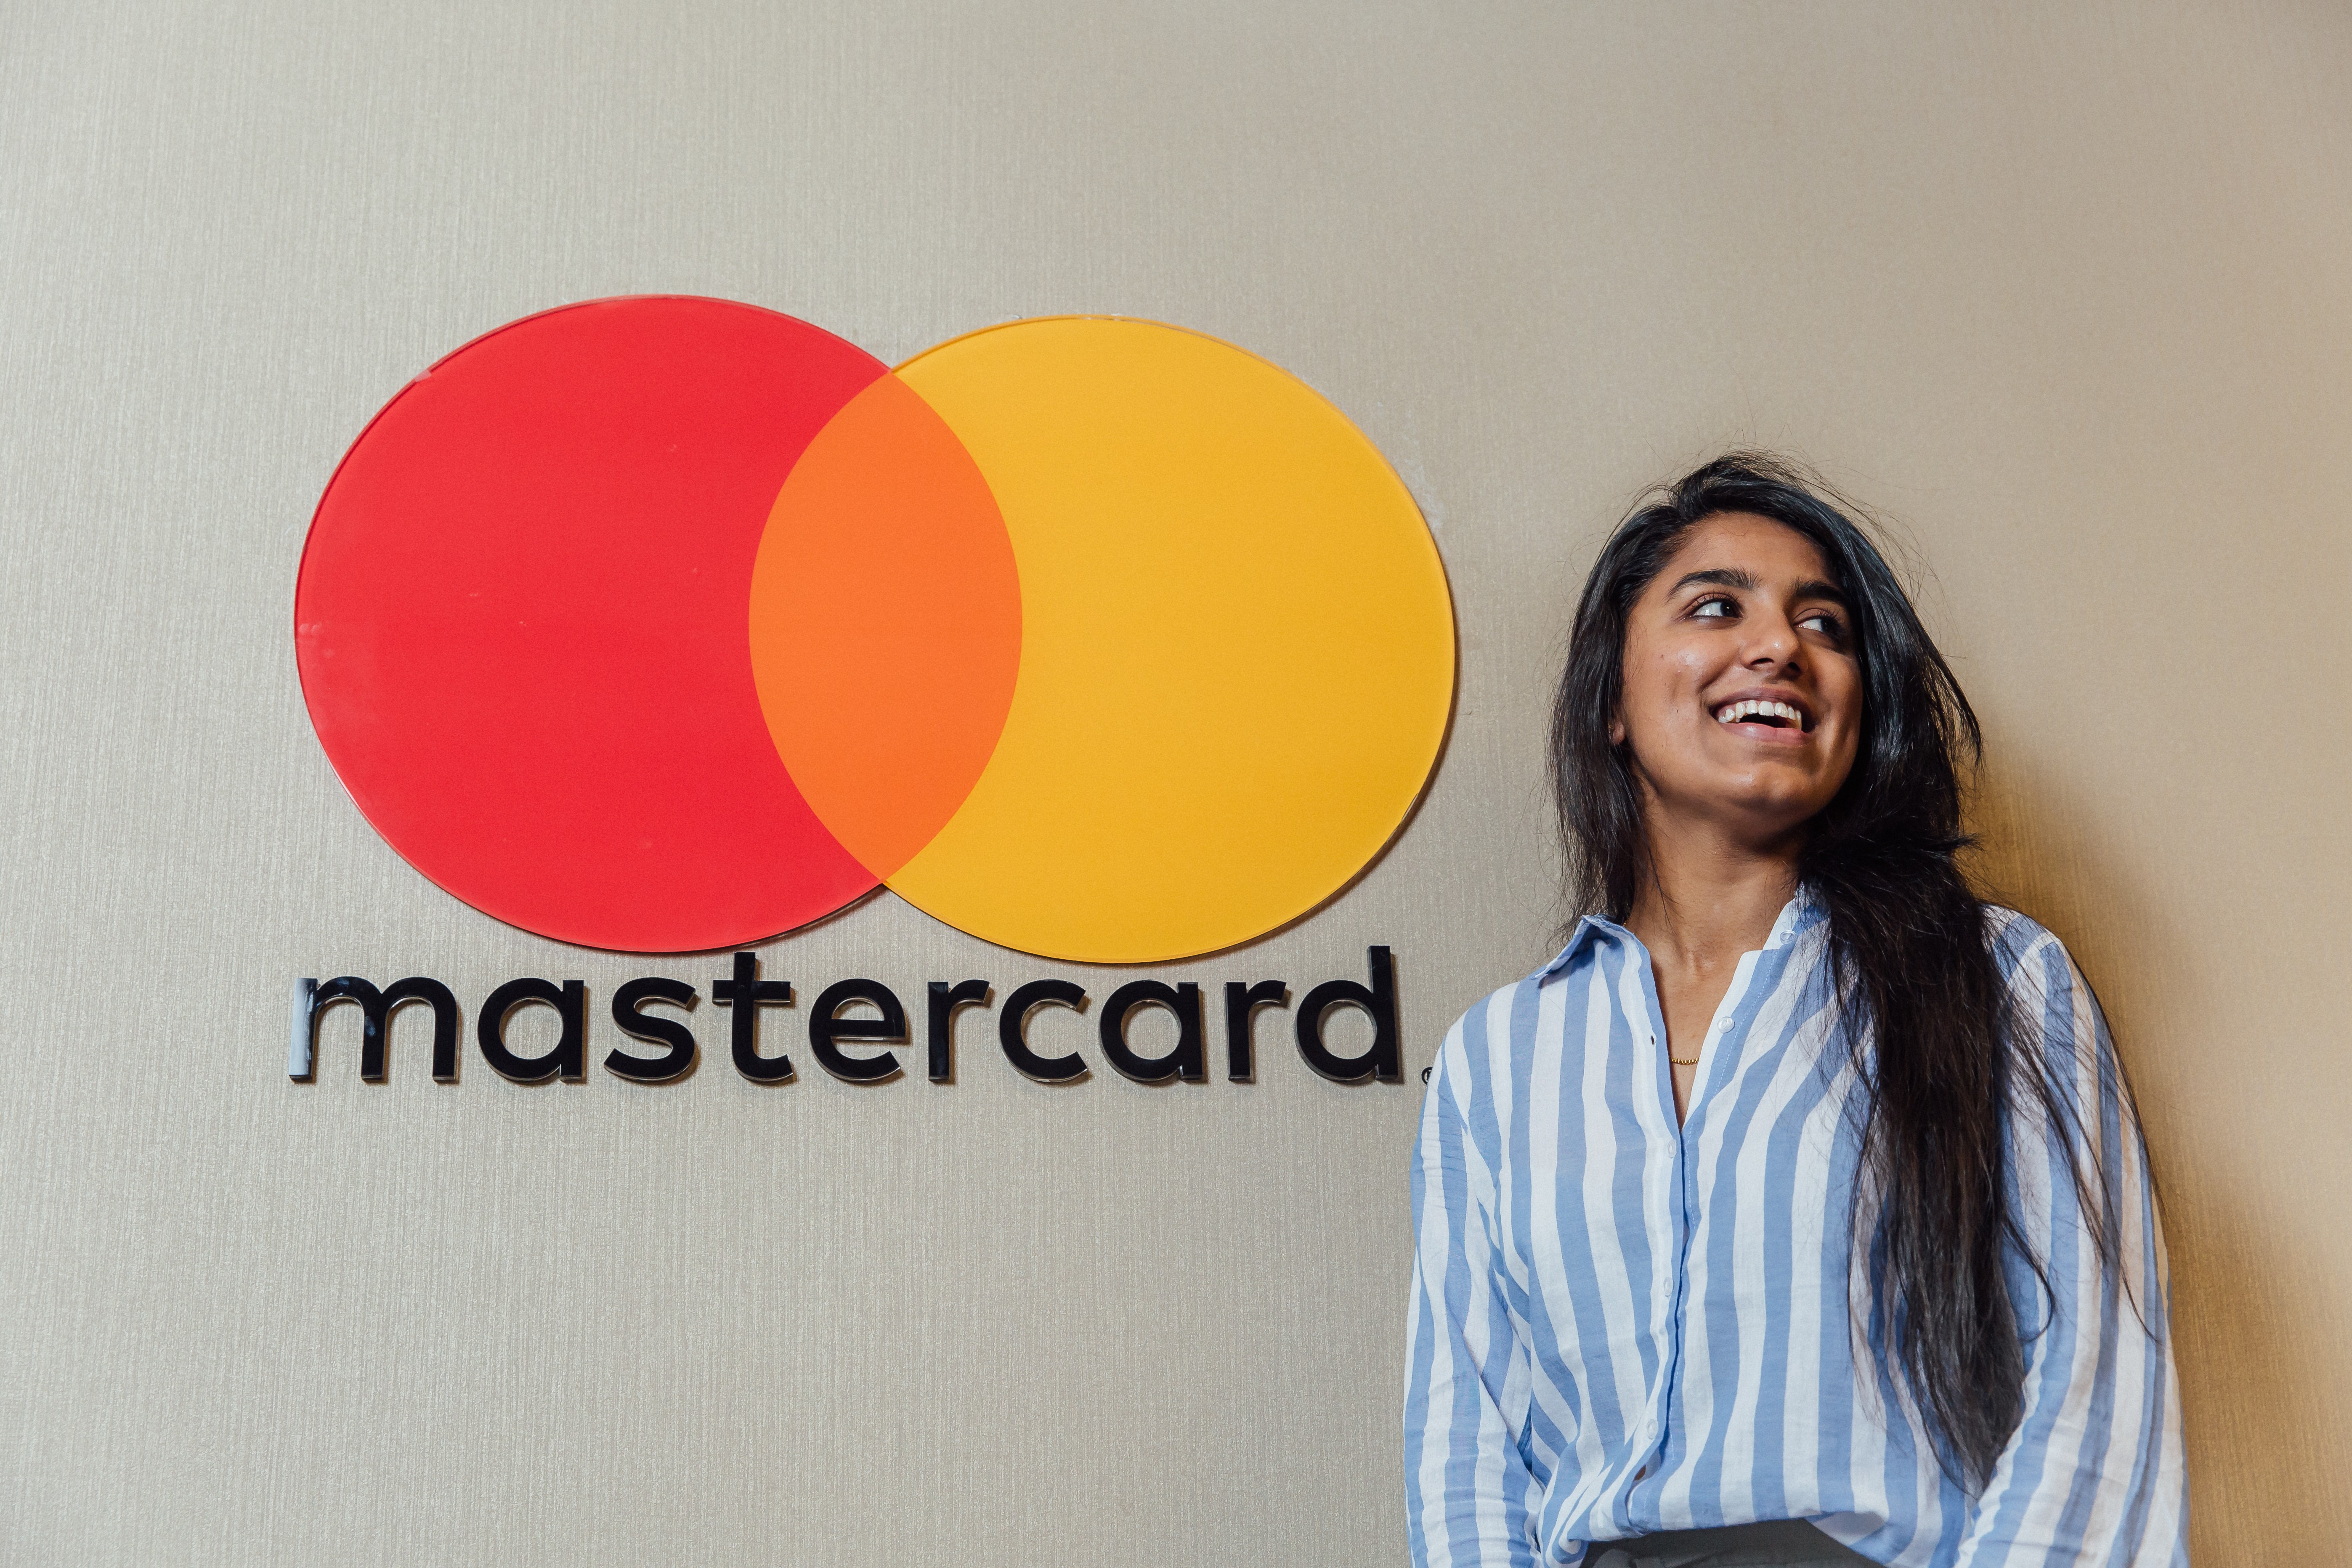 Student in front of the Mastercard company logo